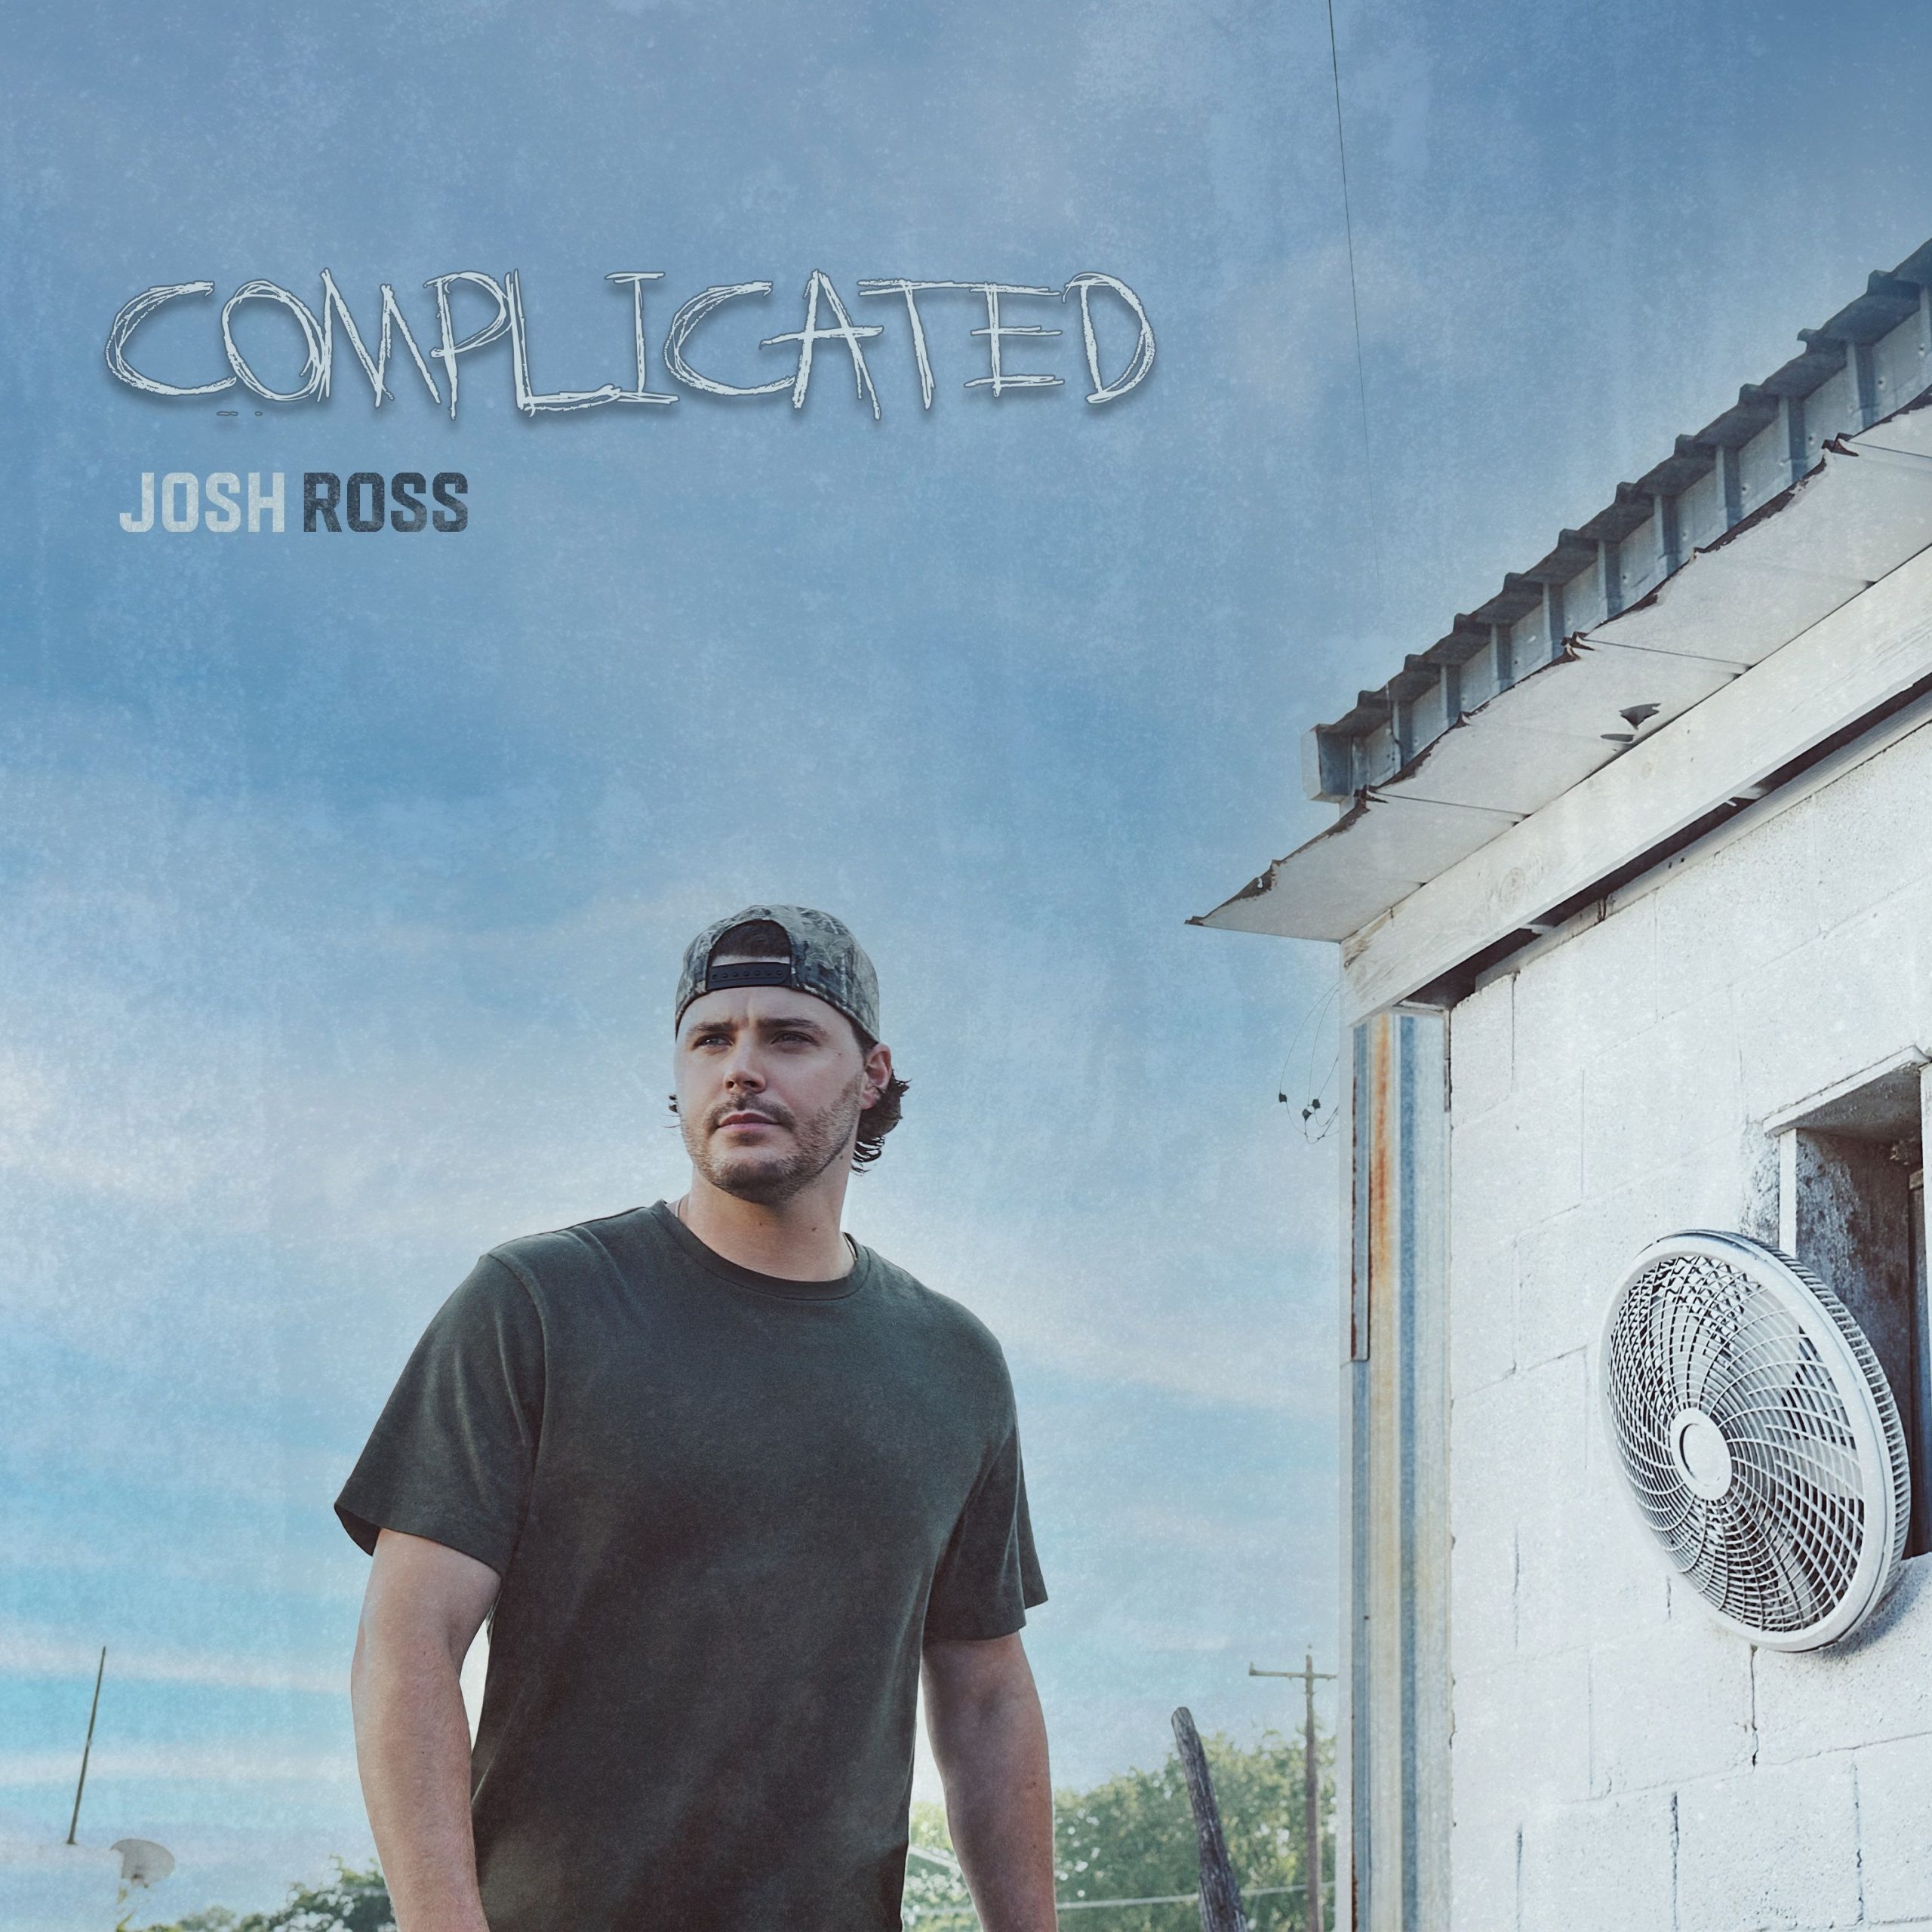 BREAKOUT COUNTRY HITMAKER JOSH ROSS ANNOUNCES NEW EP, ‘COMPLICATED’, AVAILABLE MARCH 29